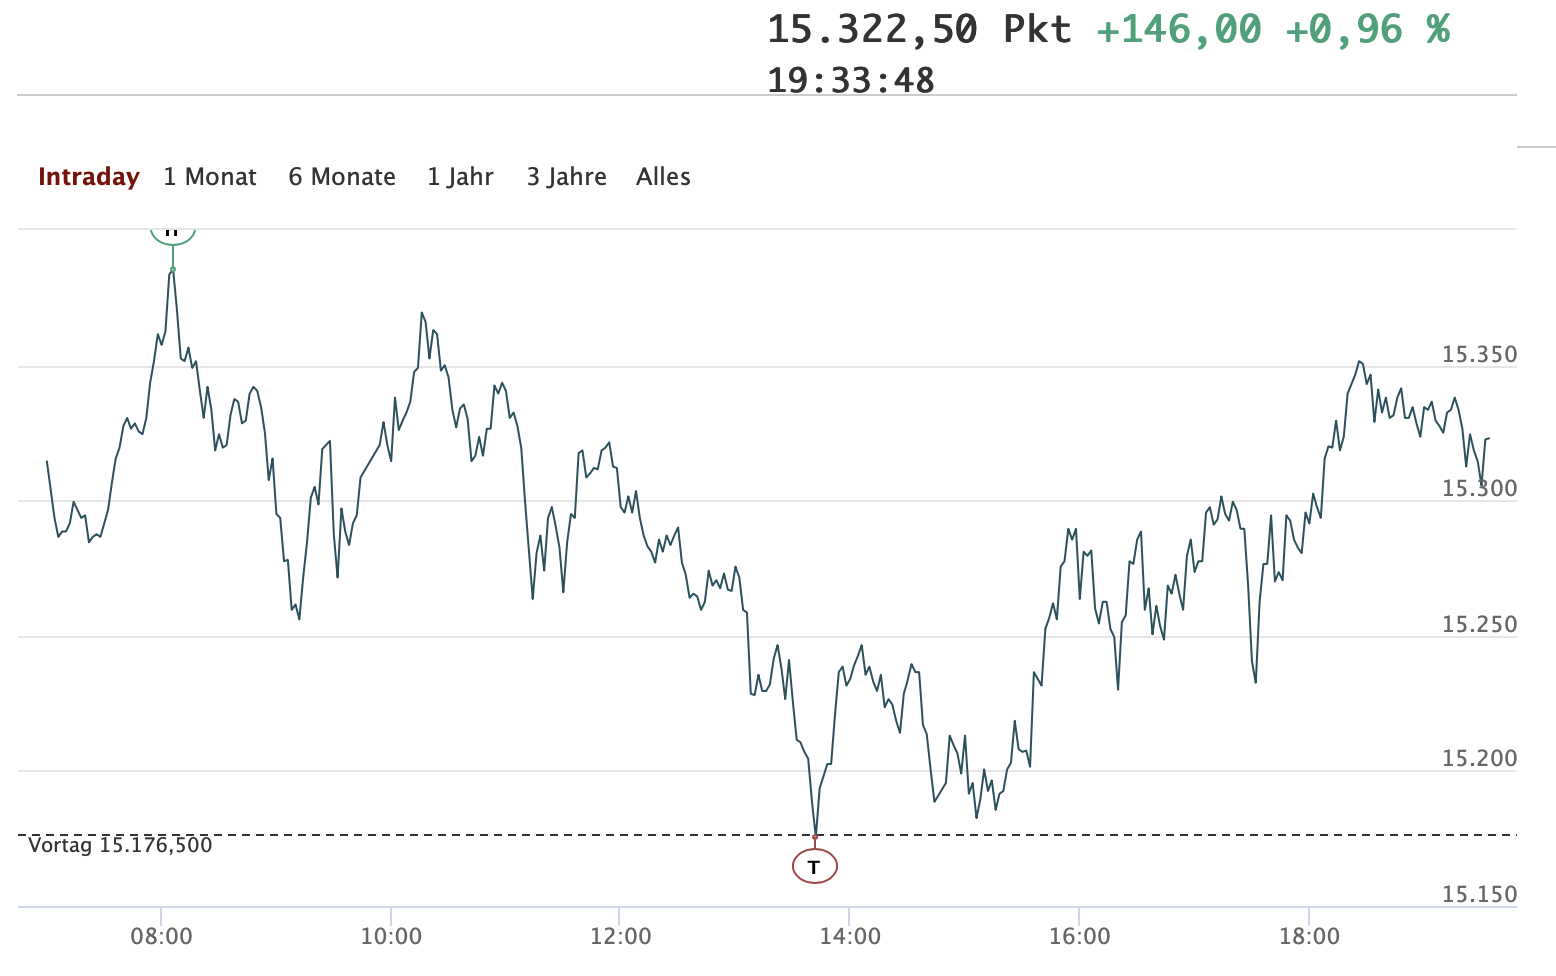 20211202-dax-intraday.png